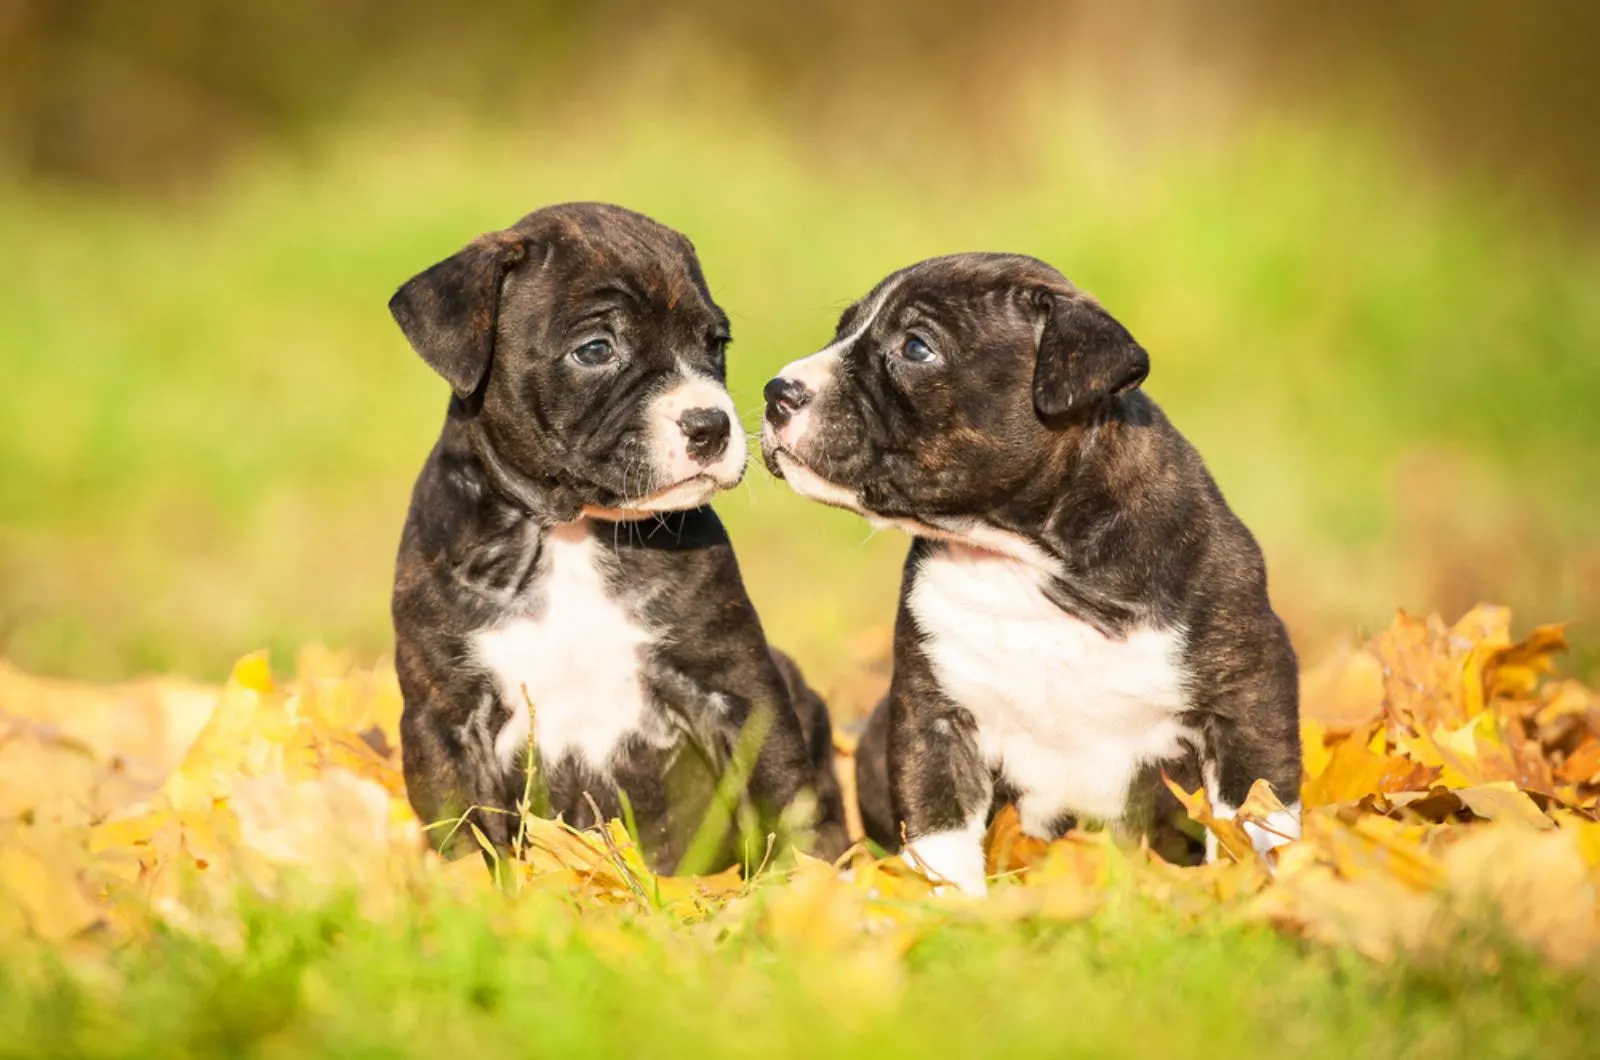 two staffordshire bull terrier puppies sitting on a fallen leaves